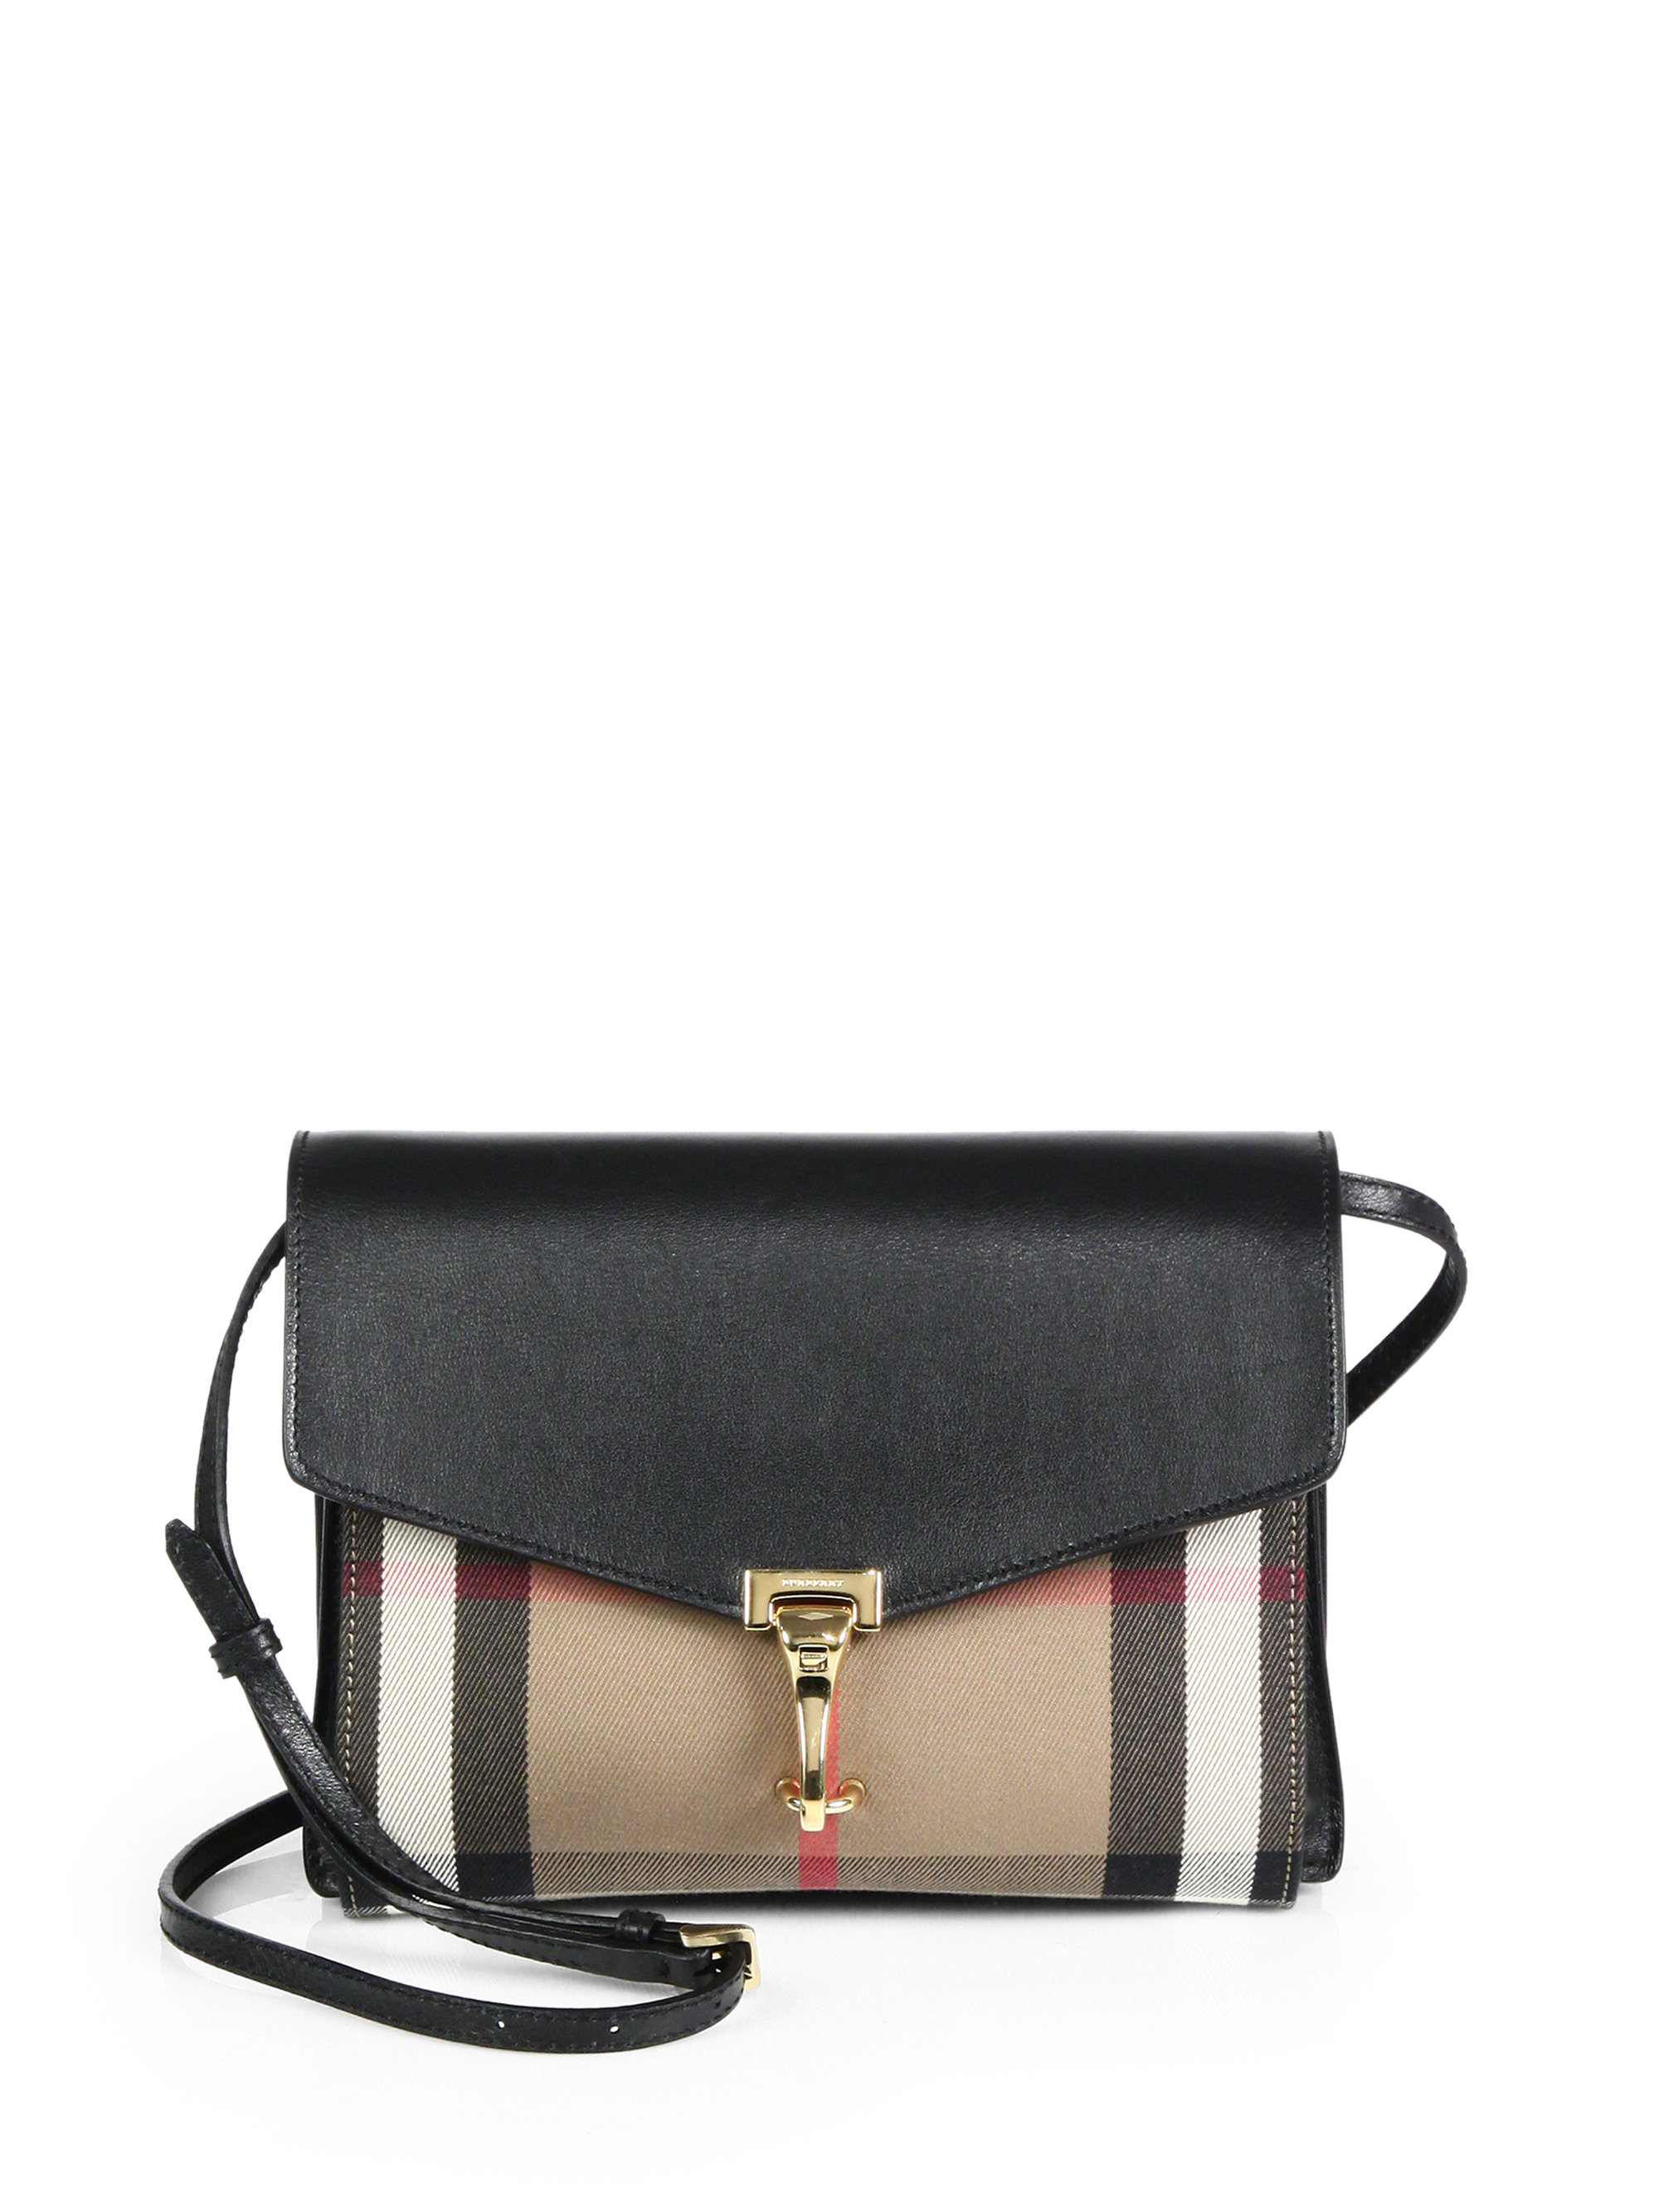 Burberry Macken Small House Check & Leather Crossbody Bag in Black - Lyst